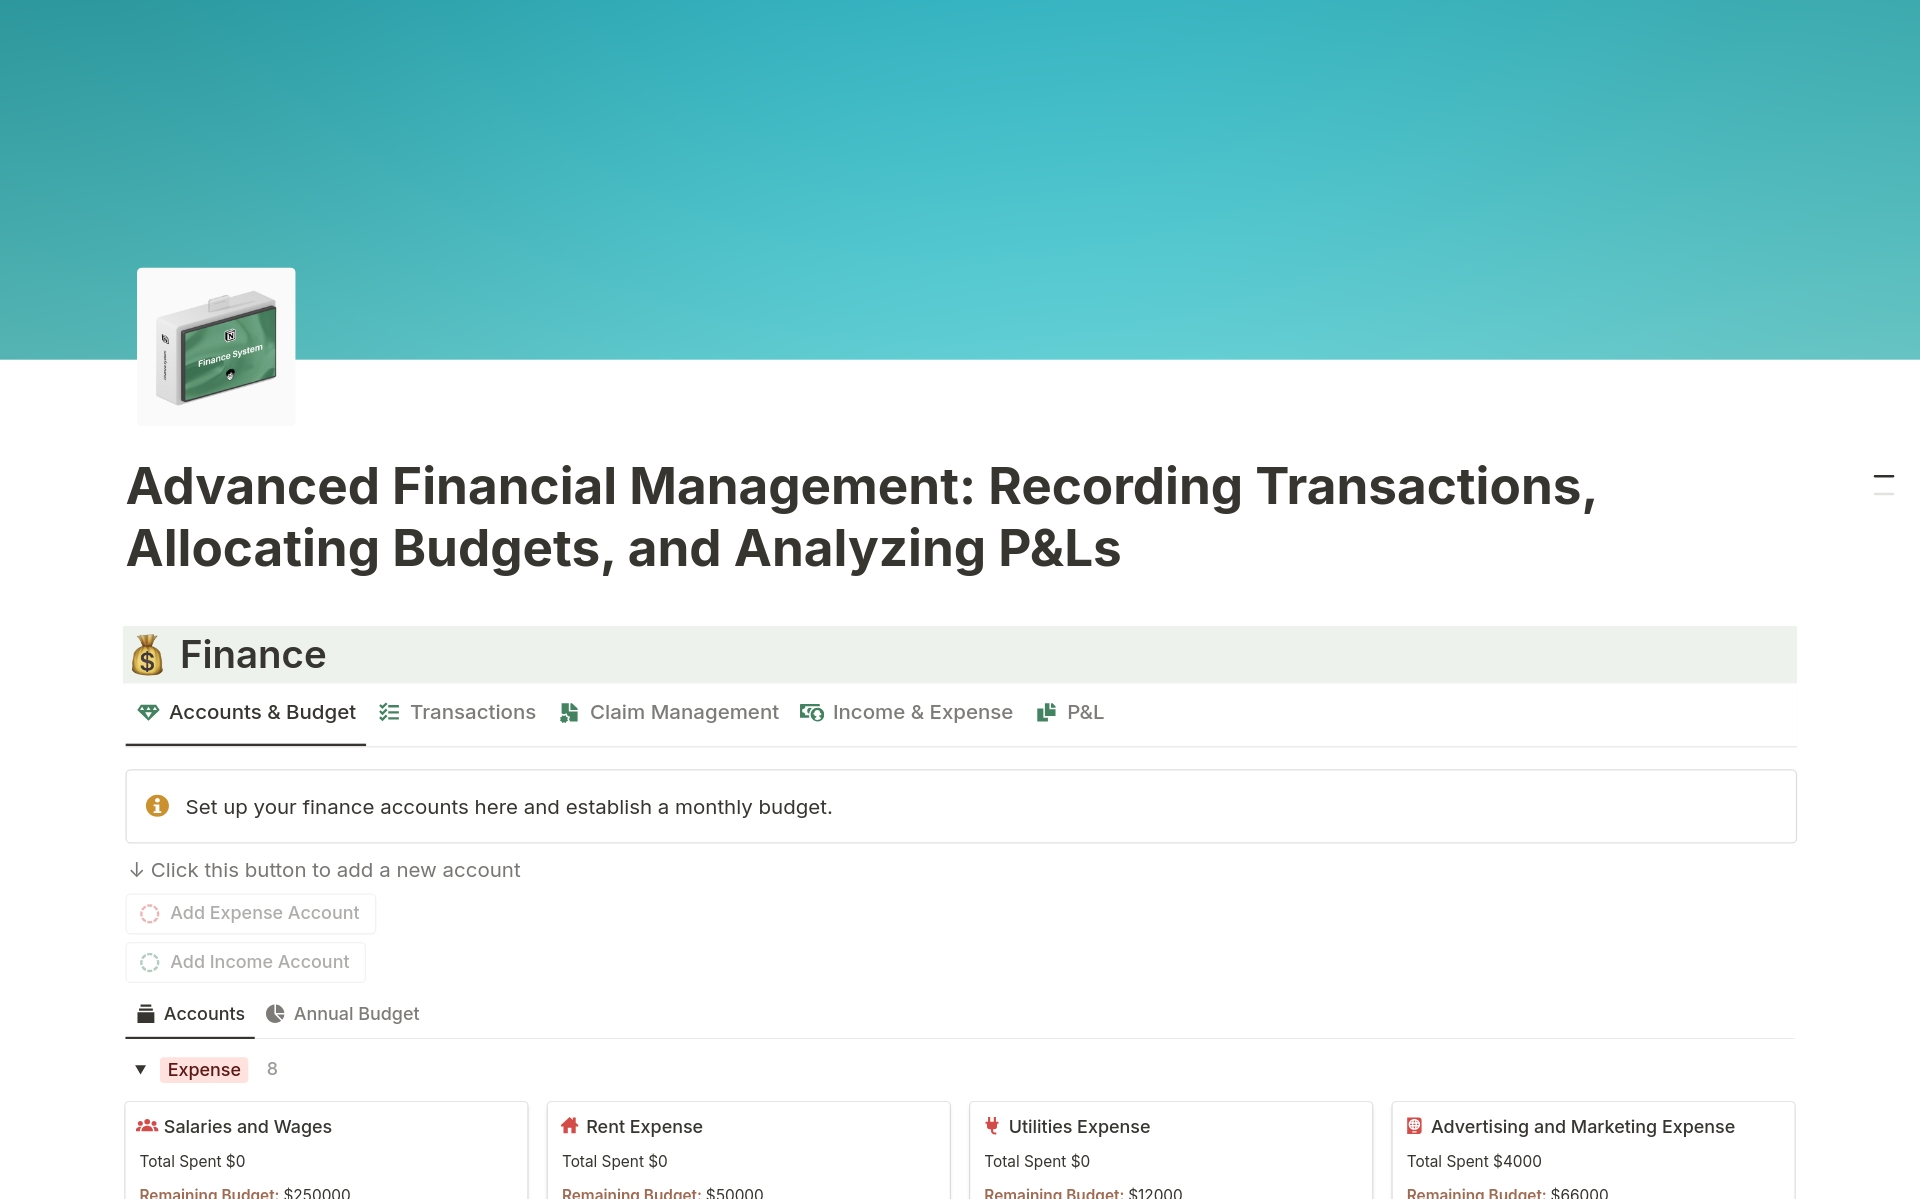 Streamline workflow from transactions to P&L statements:
✓ Accounts & Budget: Manage income, expenses, and budgets
✓ Transactions: Record income and expenses
✓ Claim Management: Organize and track claims
✓ Income & Expense: View financial breakdowns
✓ P&L: Analyze profit